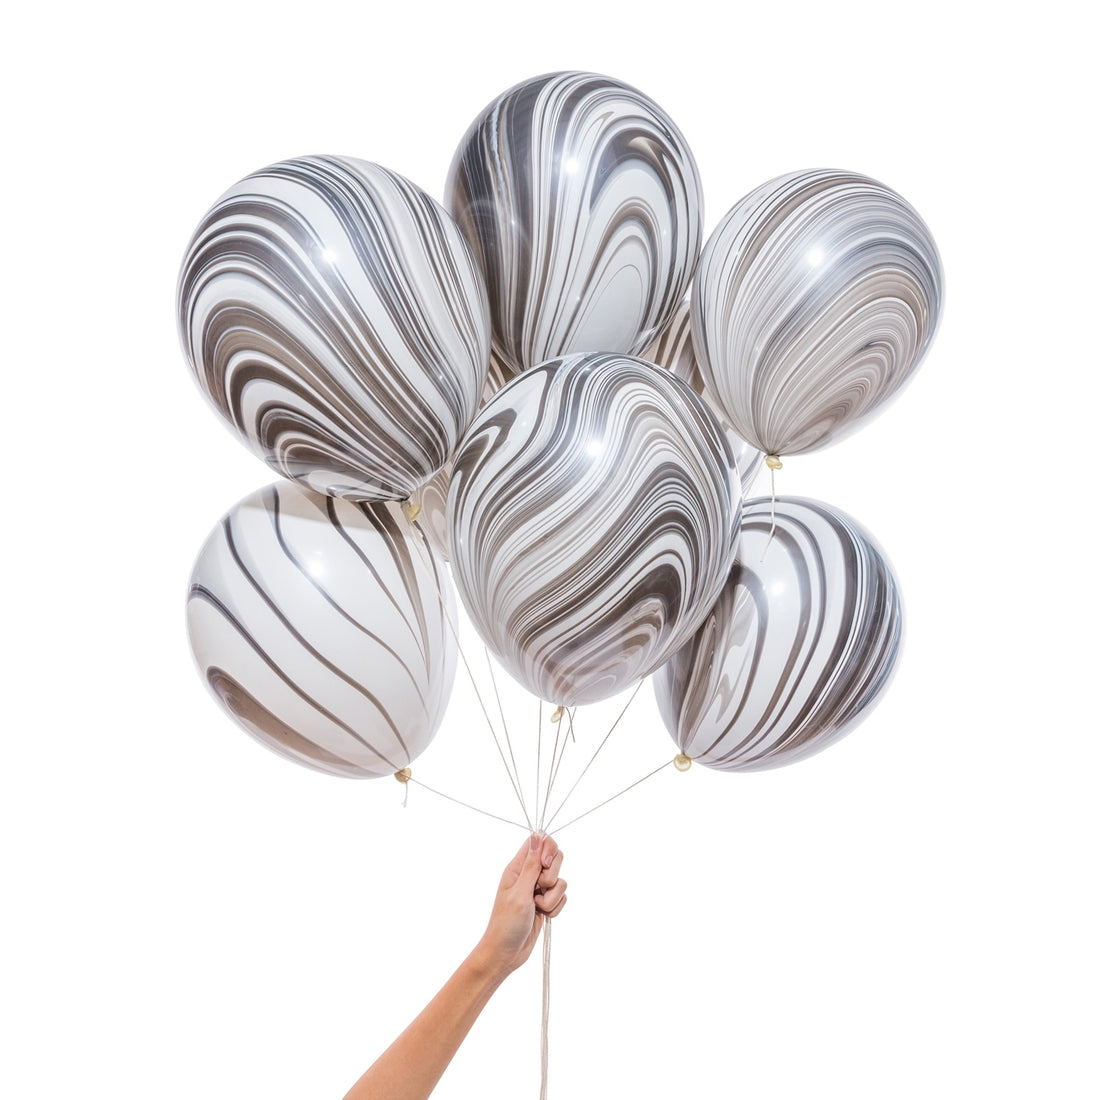 BW Marble Balloons